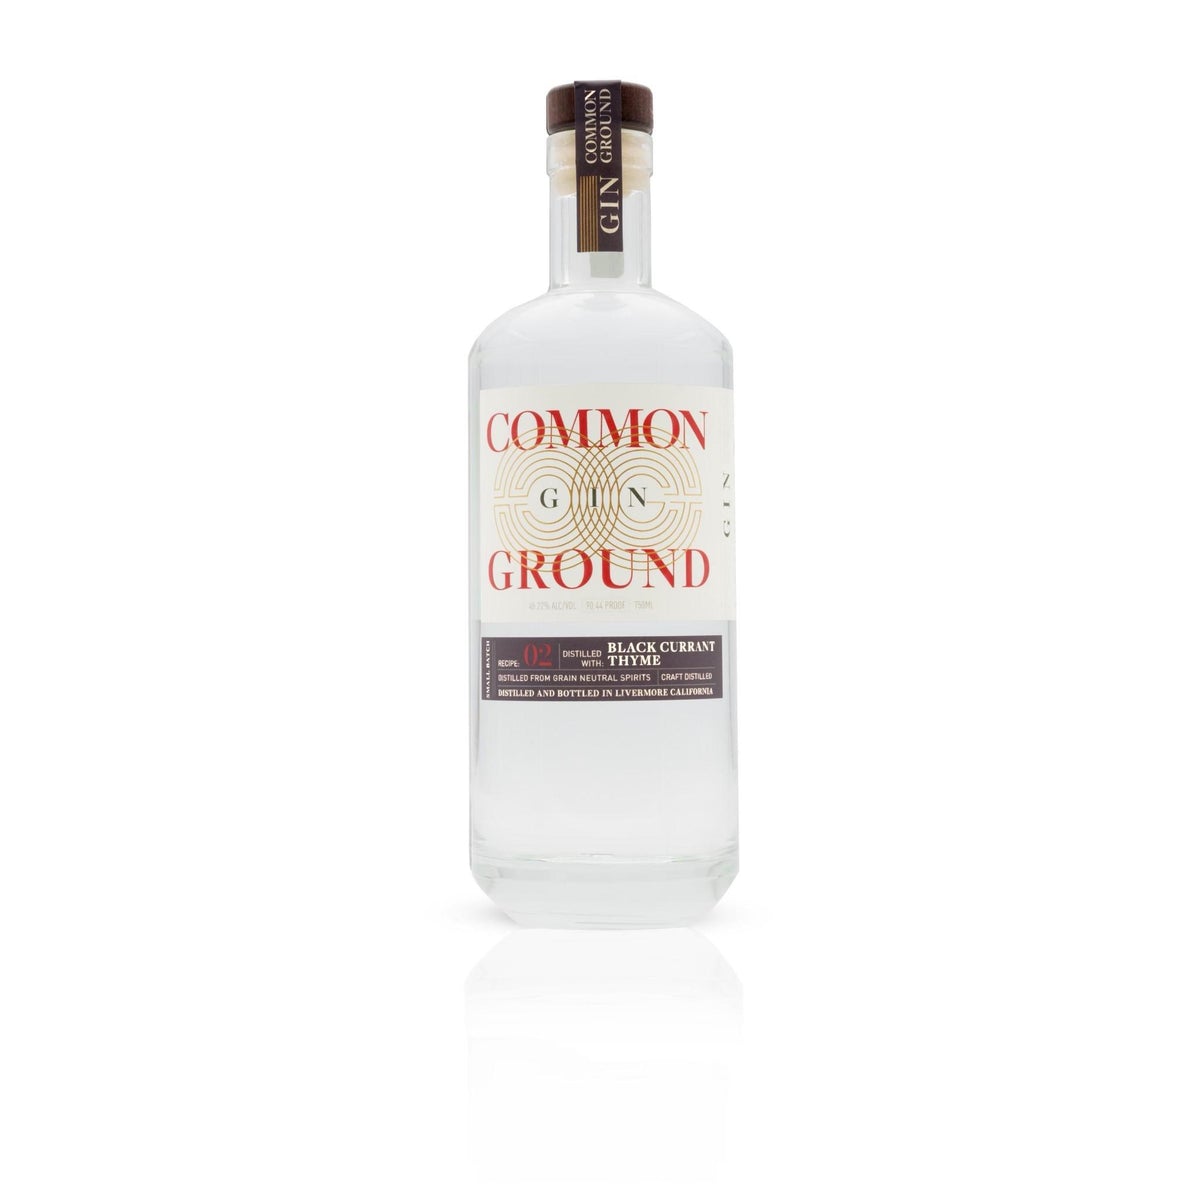 COMMON GROUND BLACK CURRANT THYME GIN